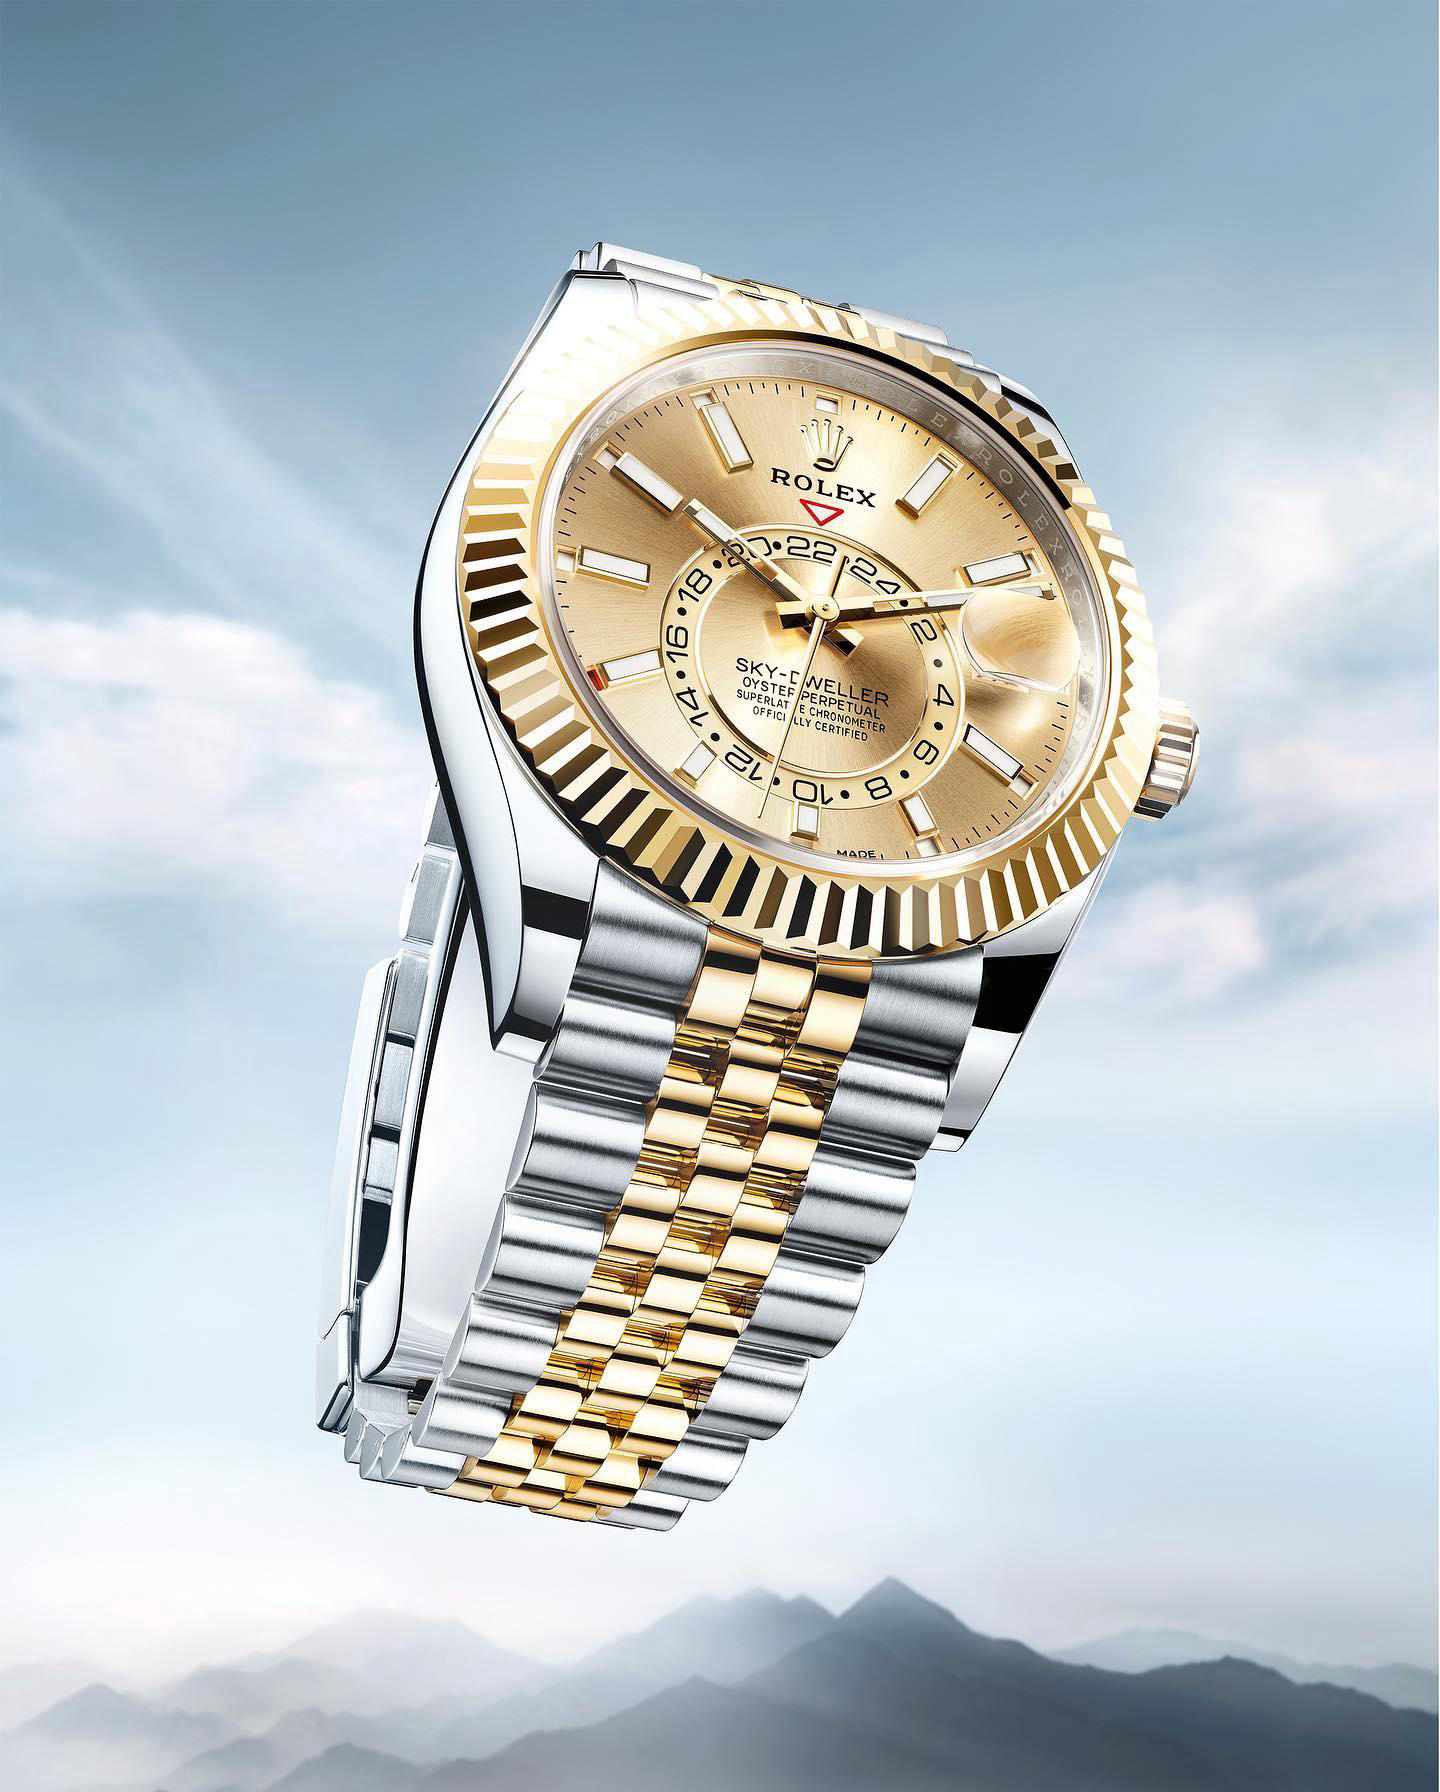 ROLEX - For all world travellers